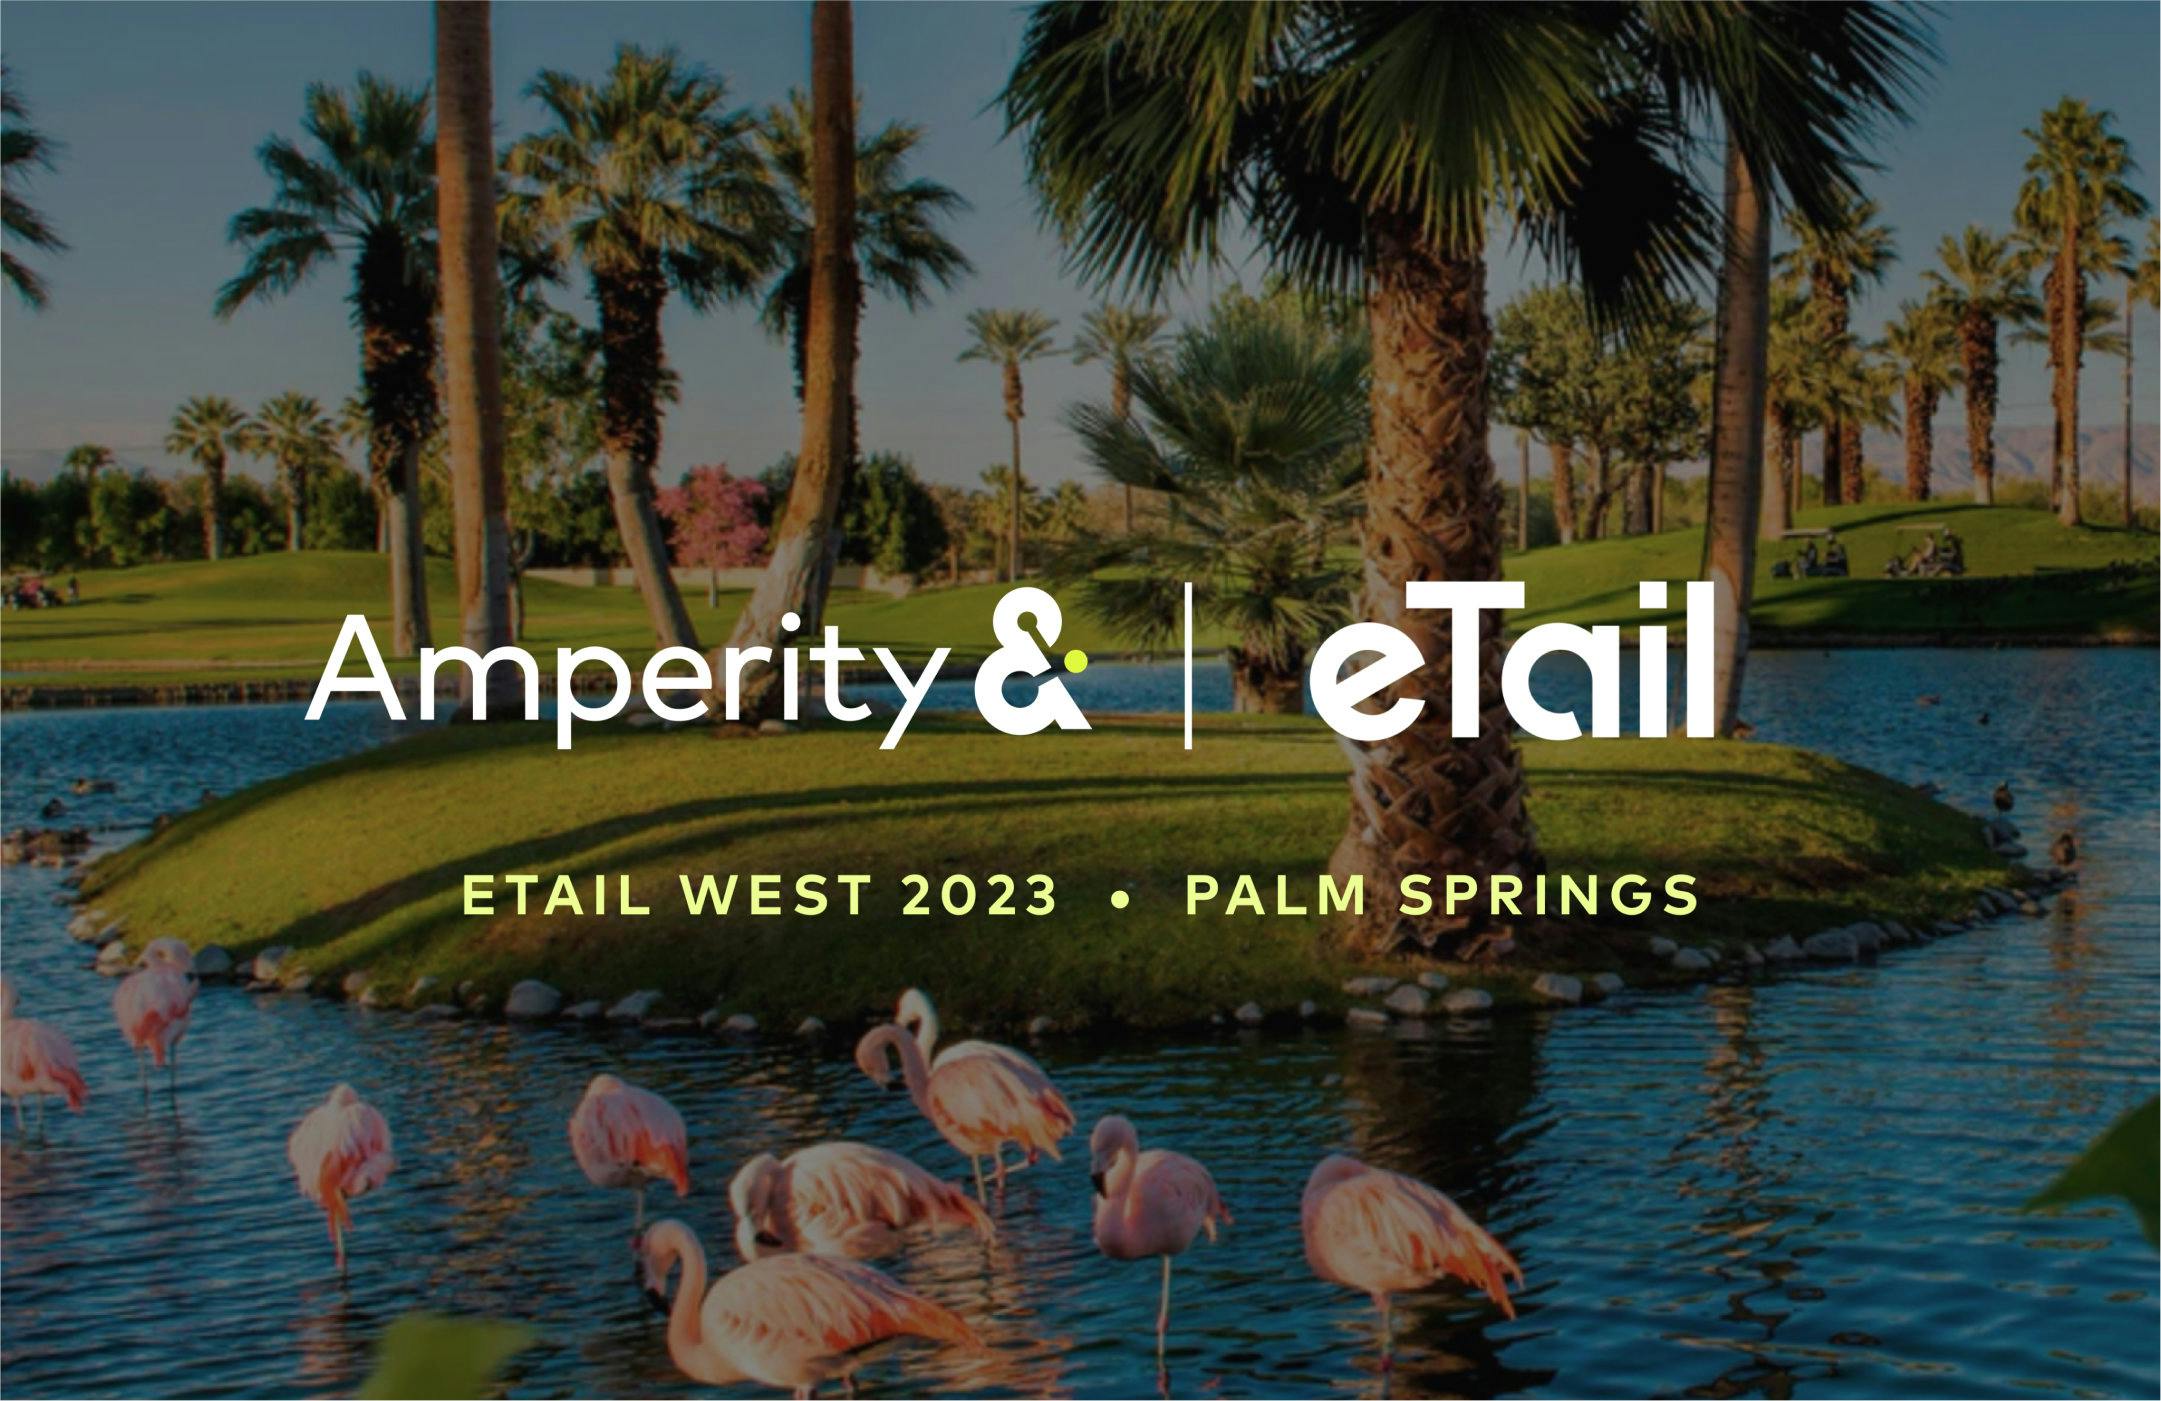 Promo image of Amperity's eTail event at Palm Springs